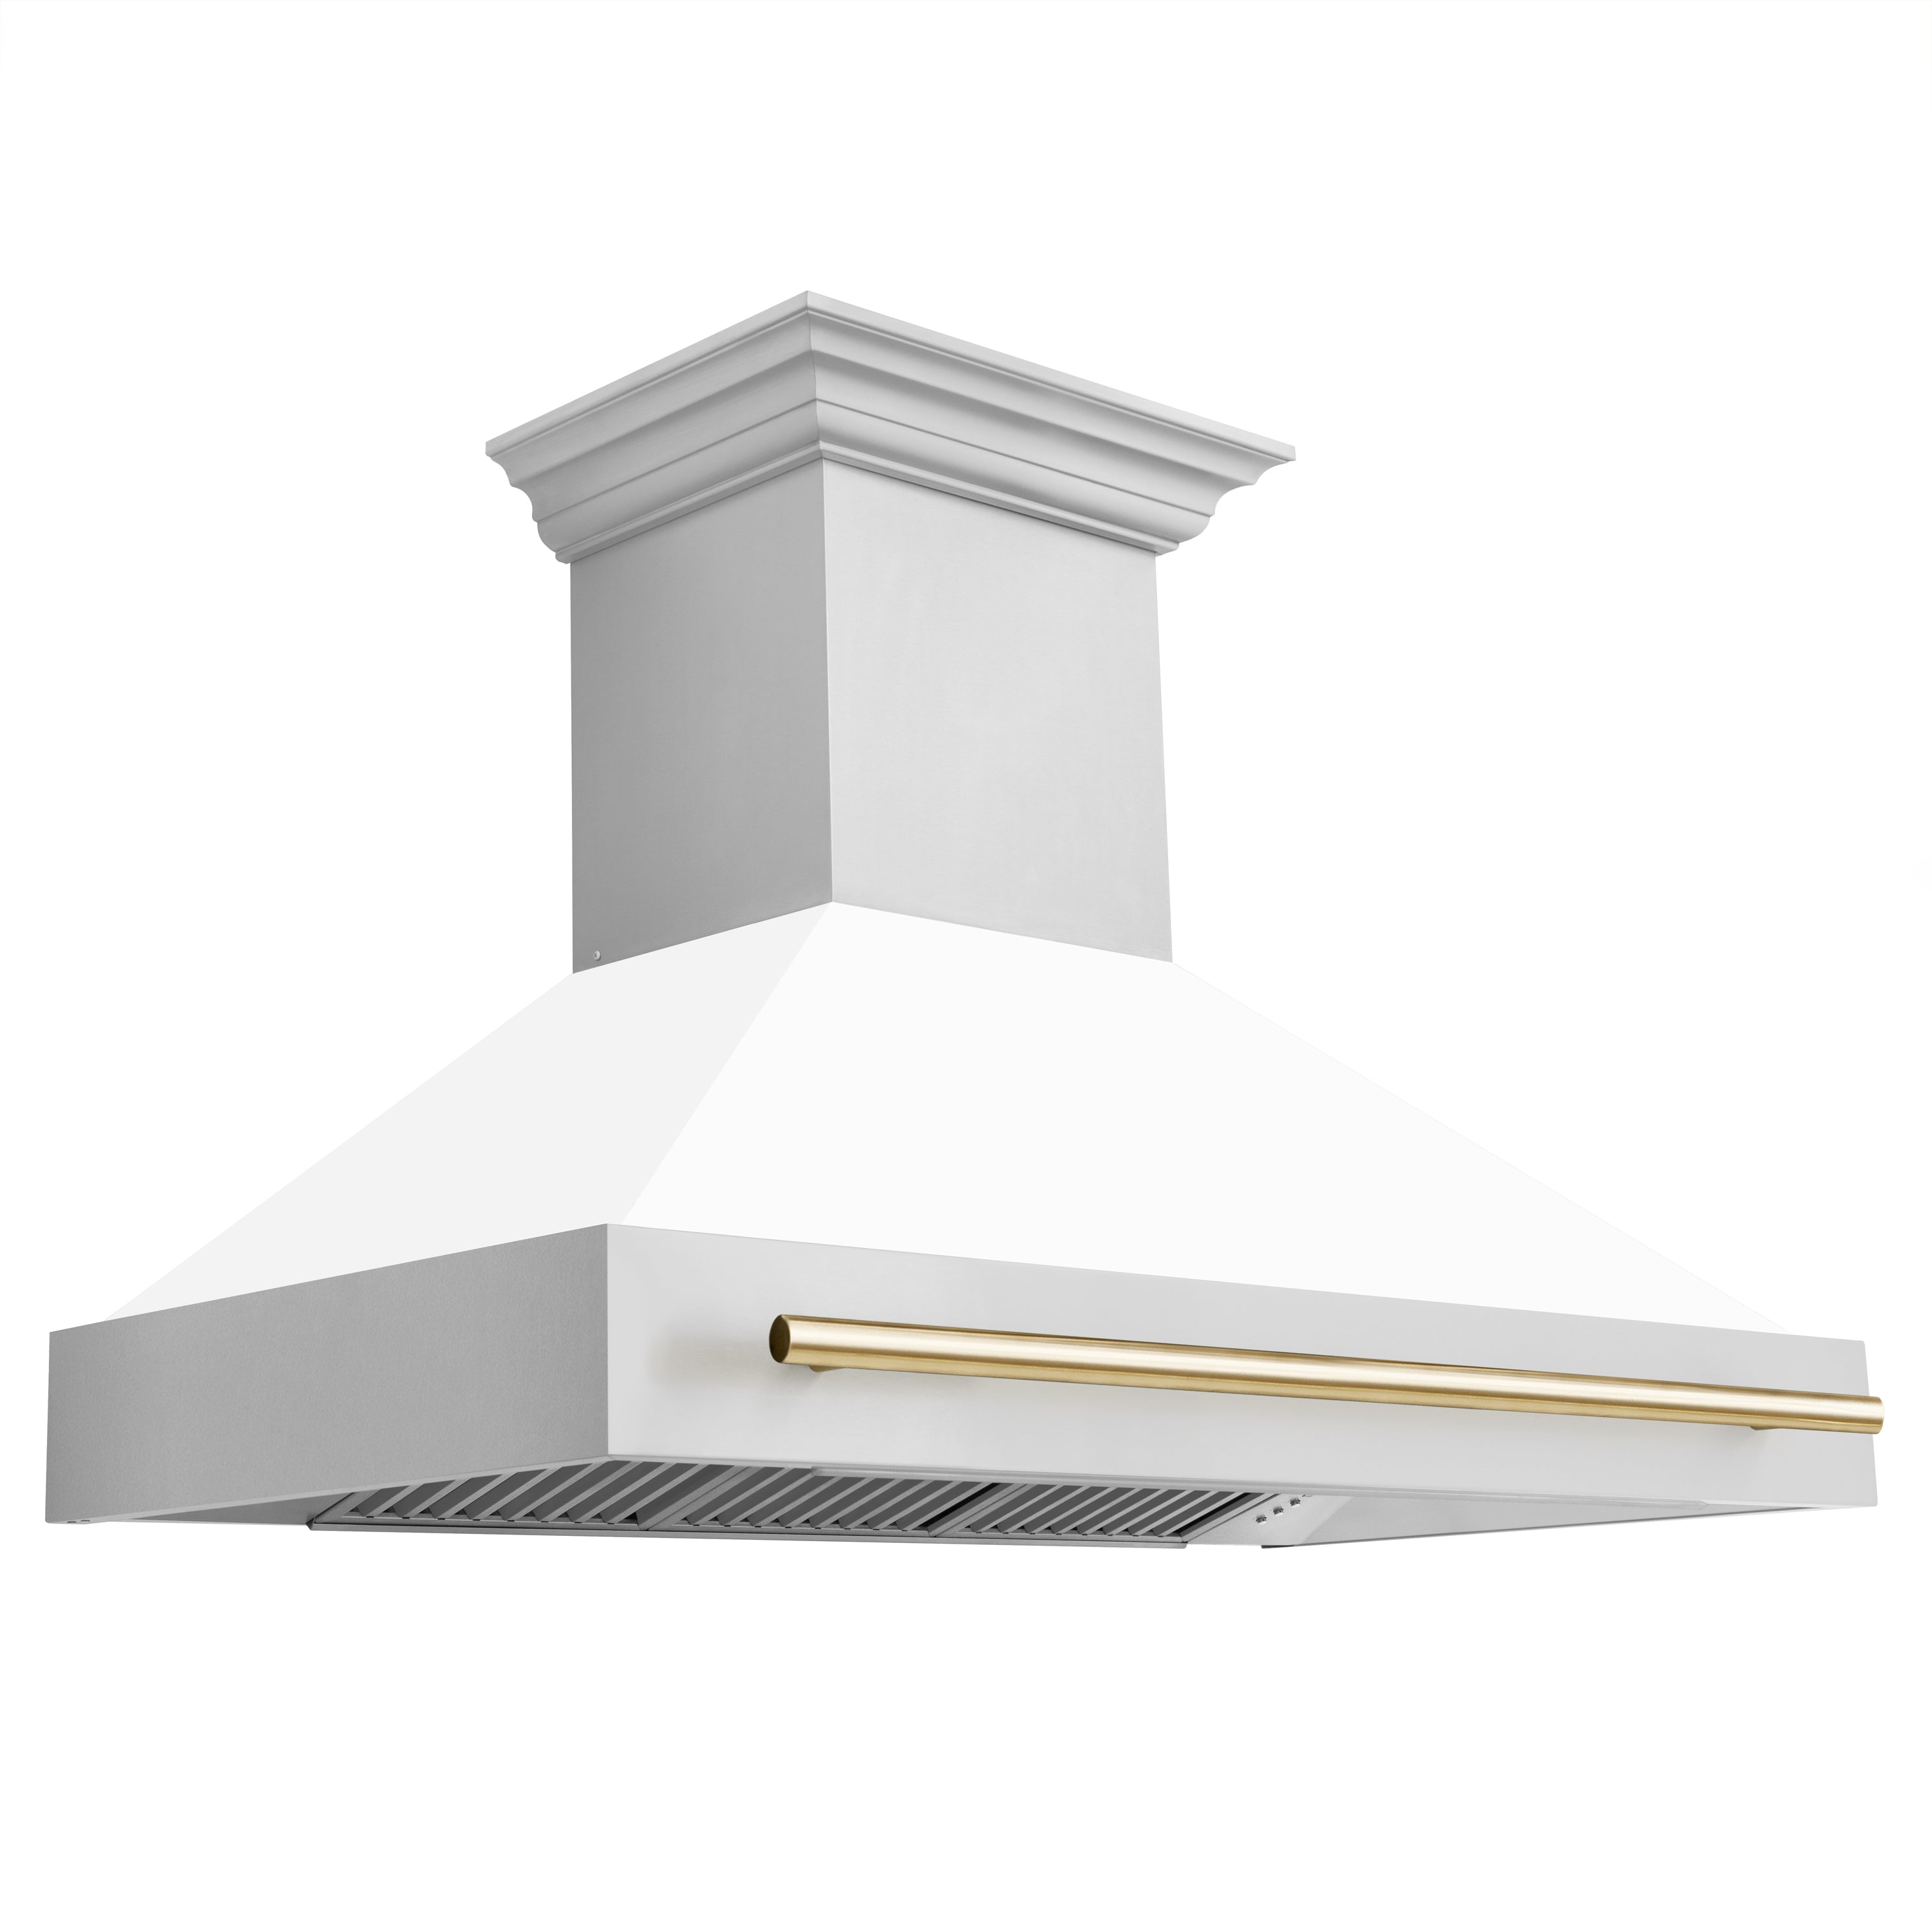 48" ZLINE Autograph Edition Stainless Steel Range Hood with White Matte Shell and Gold Handle (8654STZ-WM48-G)